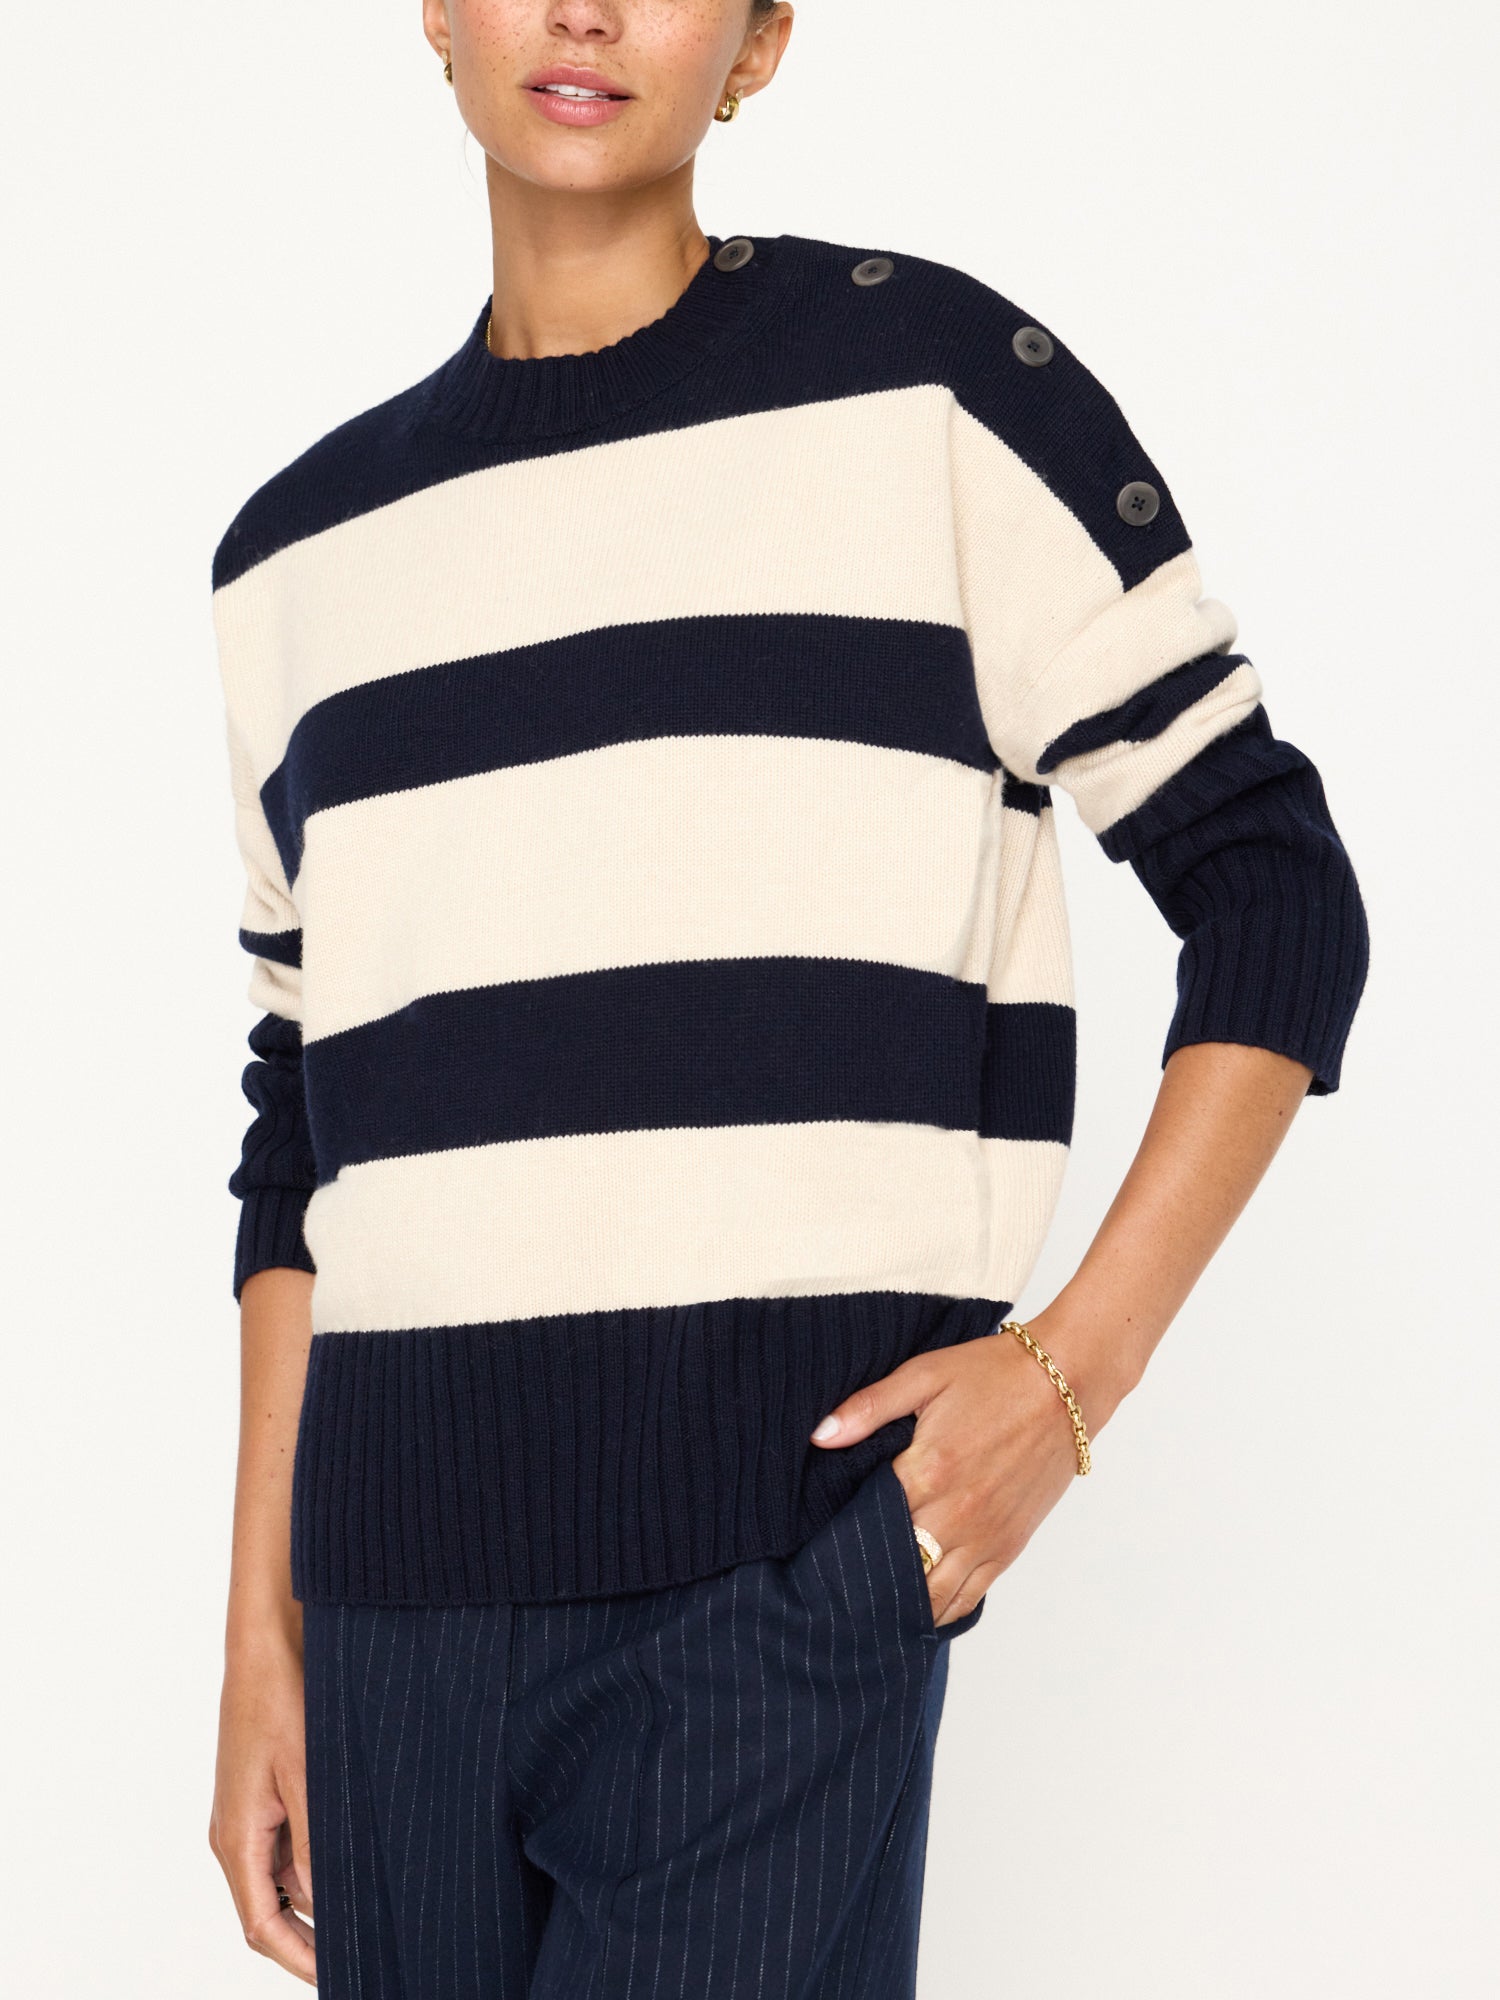 Cy navy and beige stripe crewneck sweater front view 3